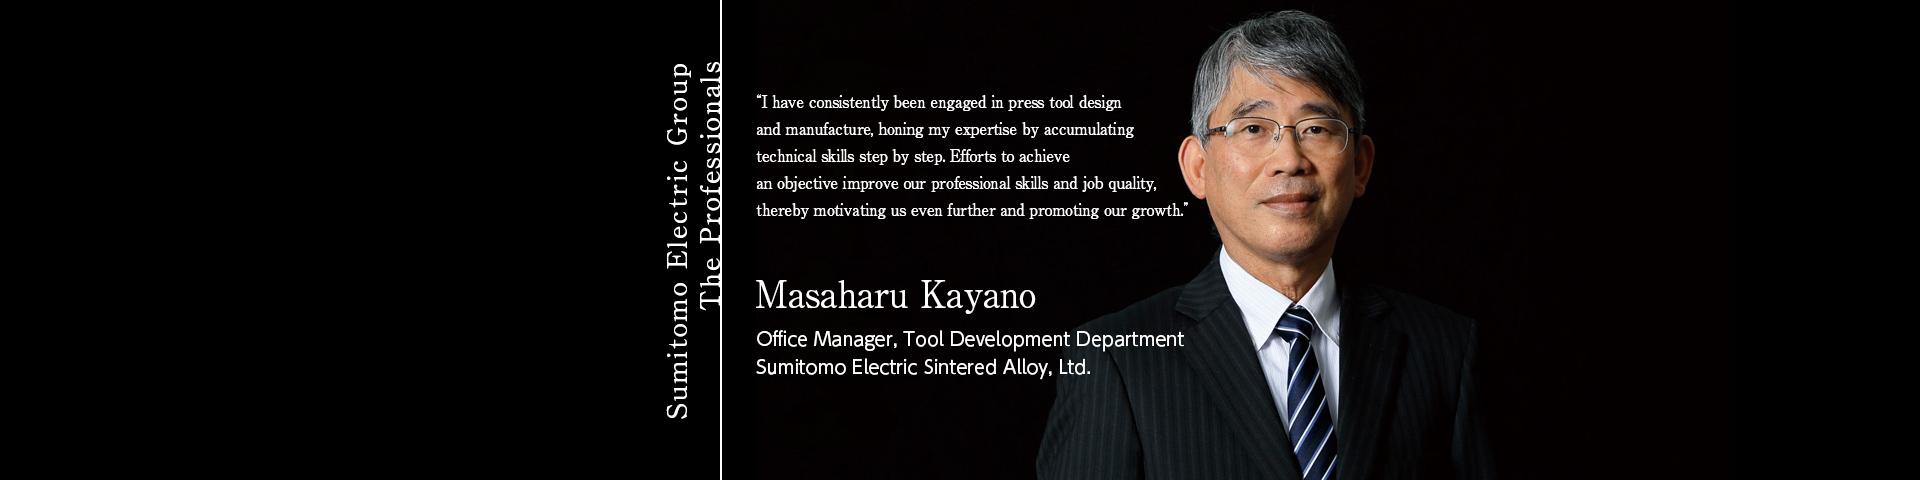 Sumitomo Electric Group The Professionals ~Masaharu Kayano Office Manager, Tool Development Department Sumitomo Electric Sintered Alloy, Ltd.~ 